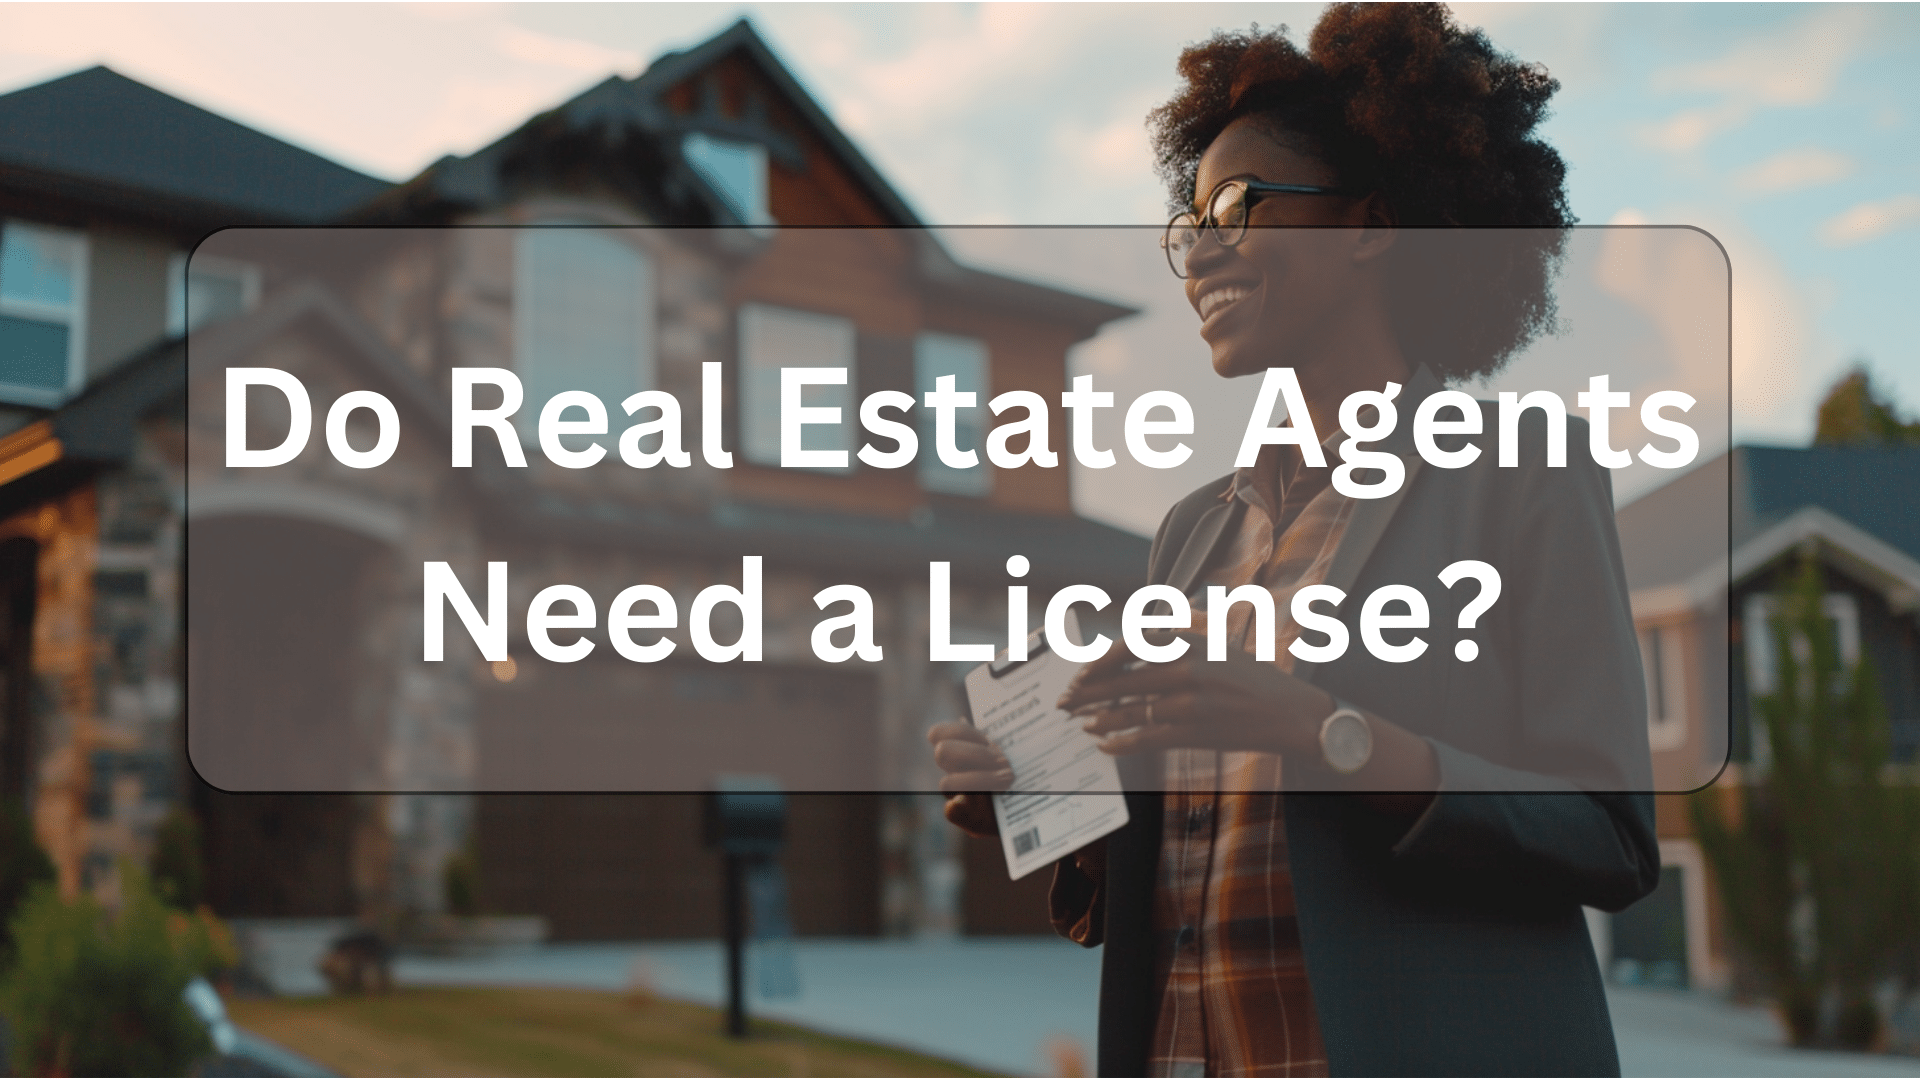 Do real estate agents need a license illustration